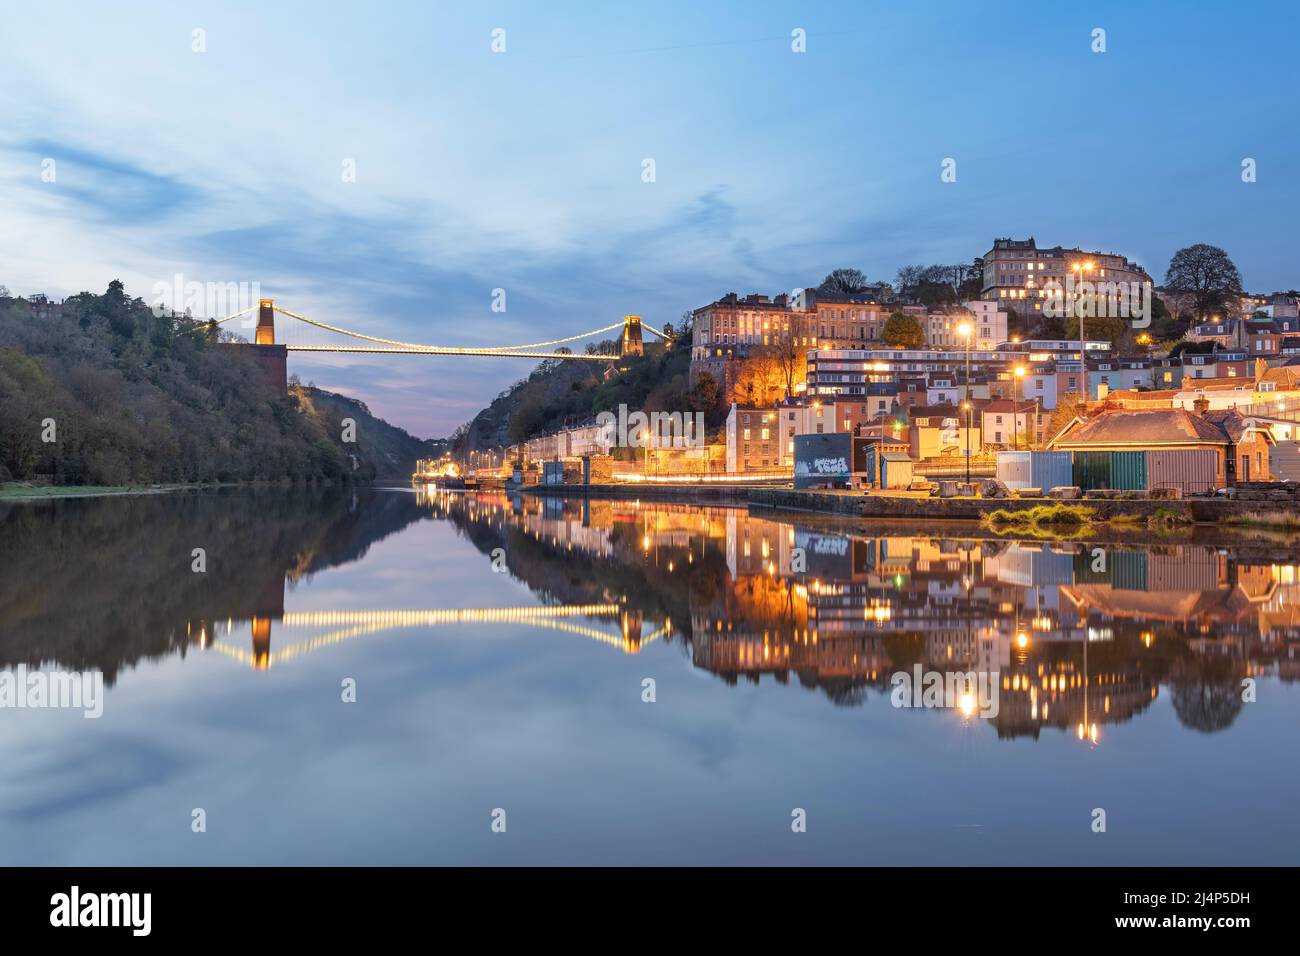 Clifton Suspension Bridge Reflected in the River Avon at High Tide. Stock Photo